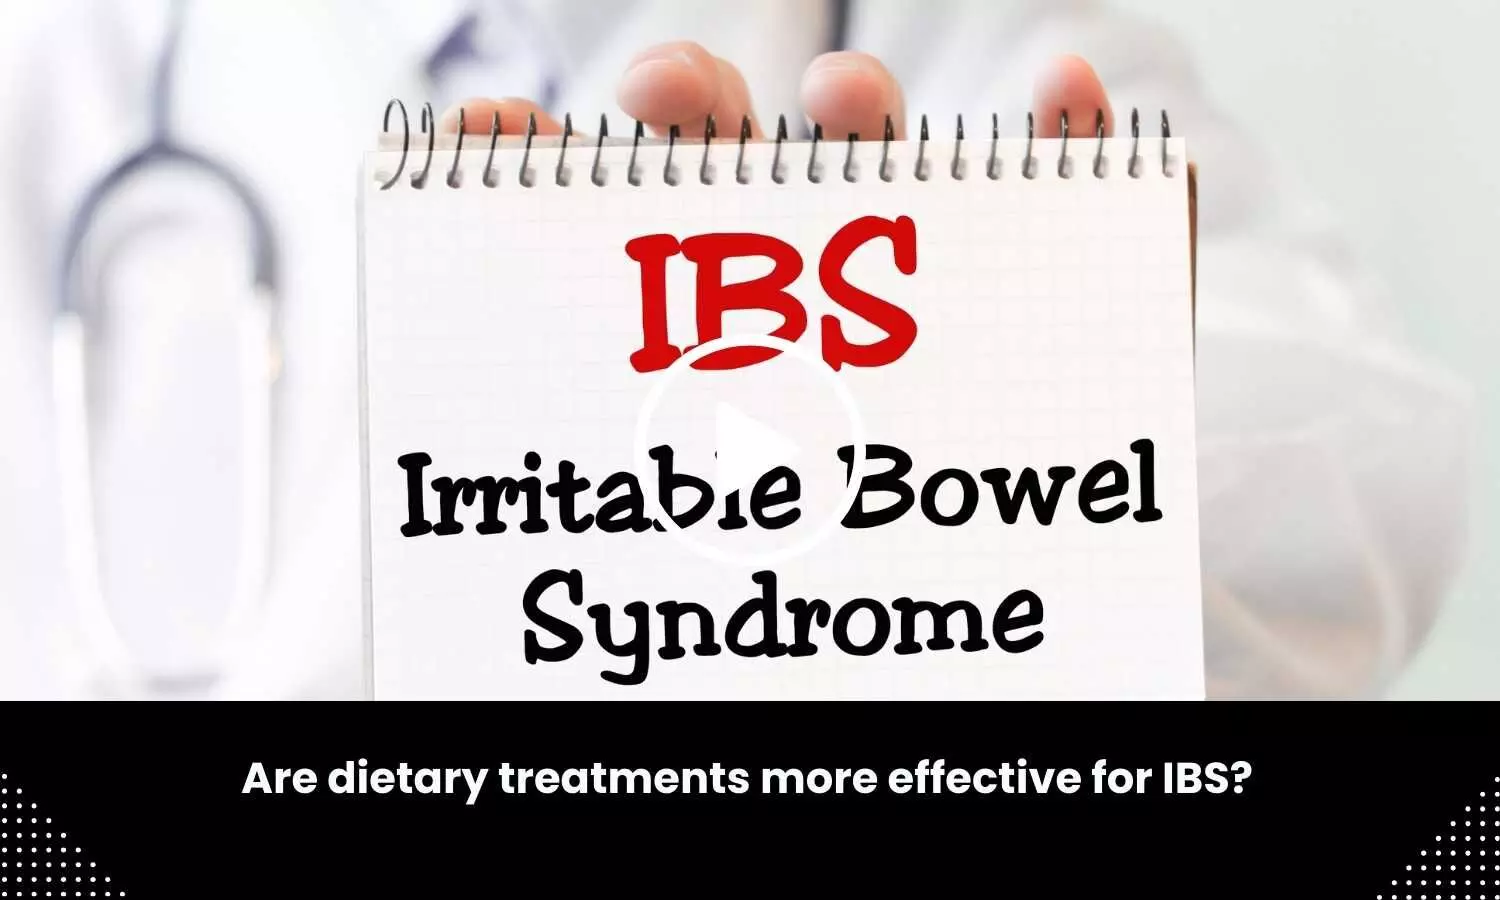 Are dietary treatments more effective for IBS?